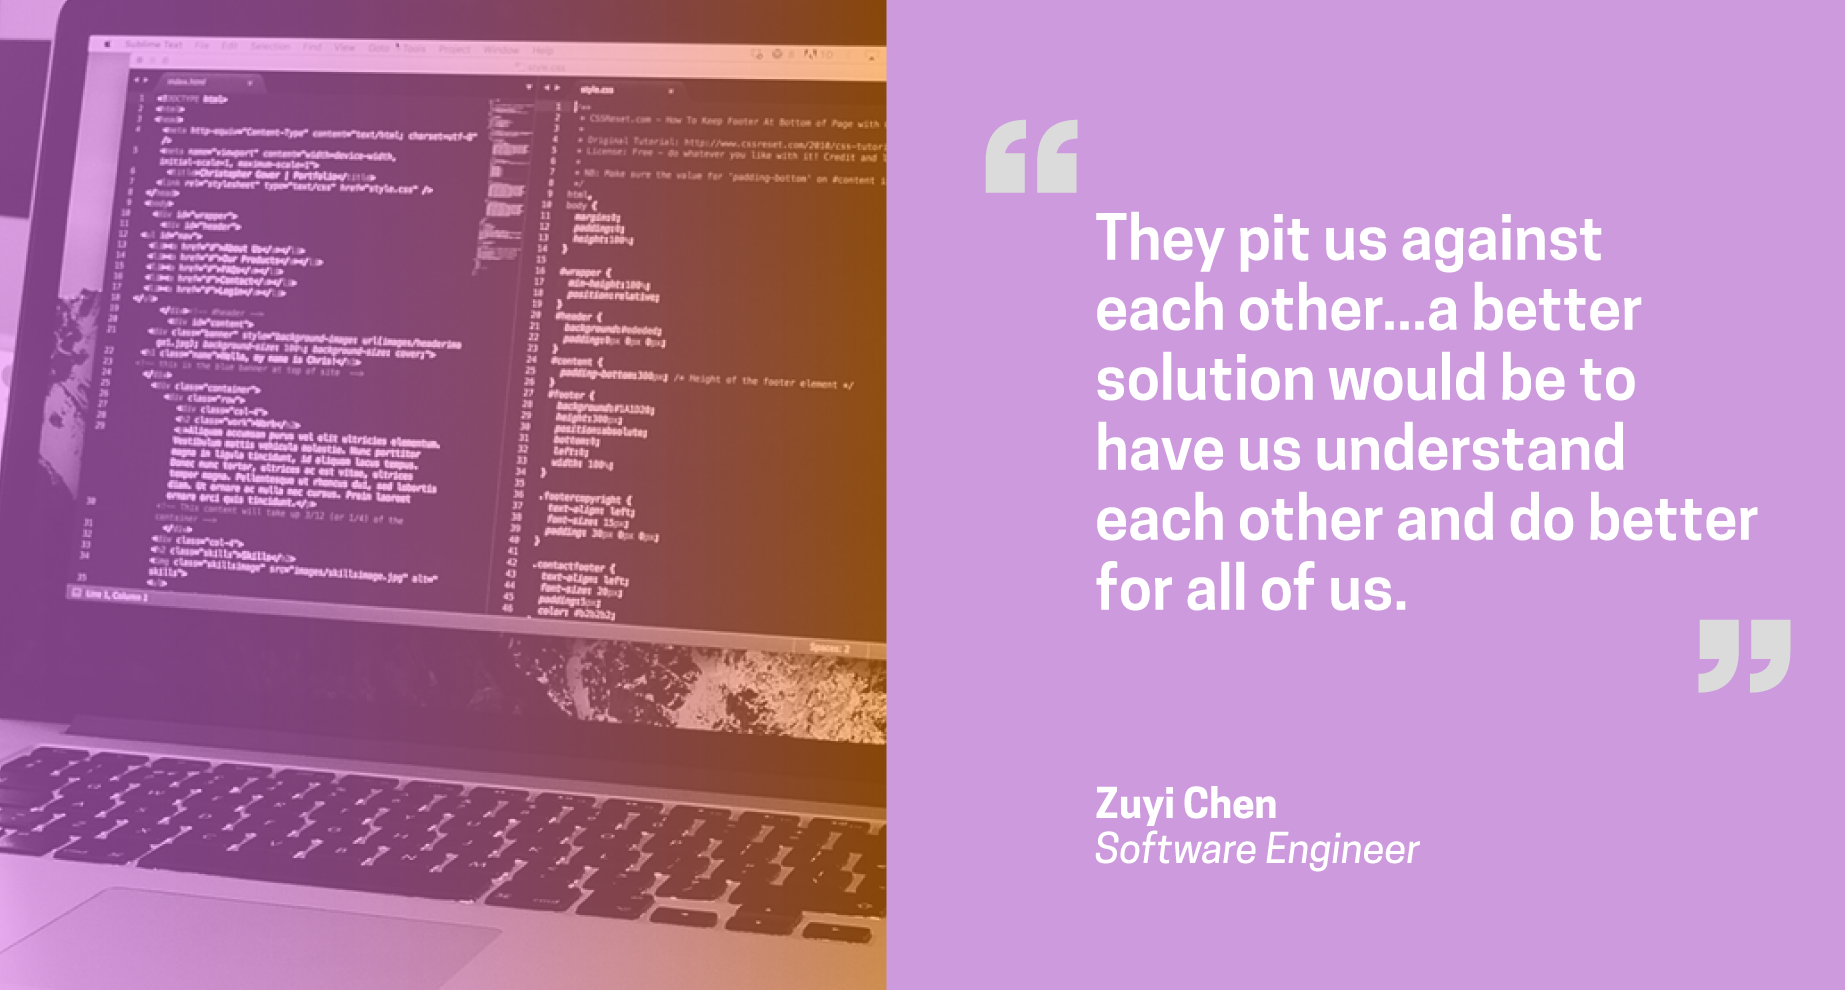 Quote from Zuyi Chen, software engineer: They pit us against each other... a better solution would be to have us understand each other and do better for all of us.